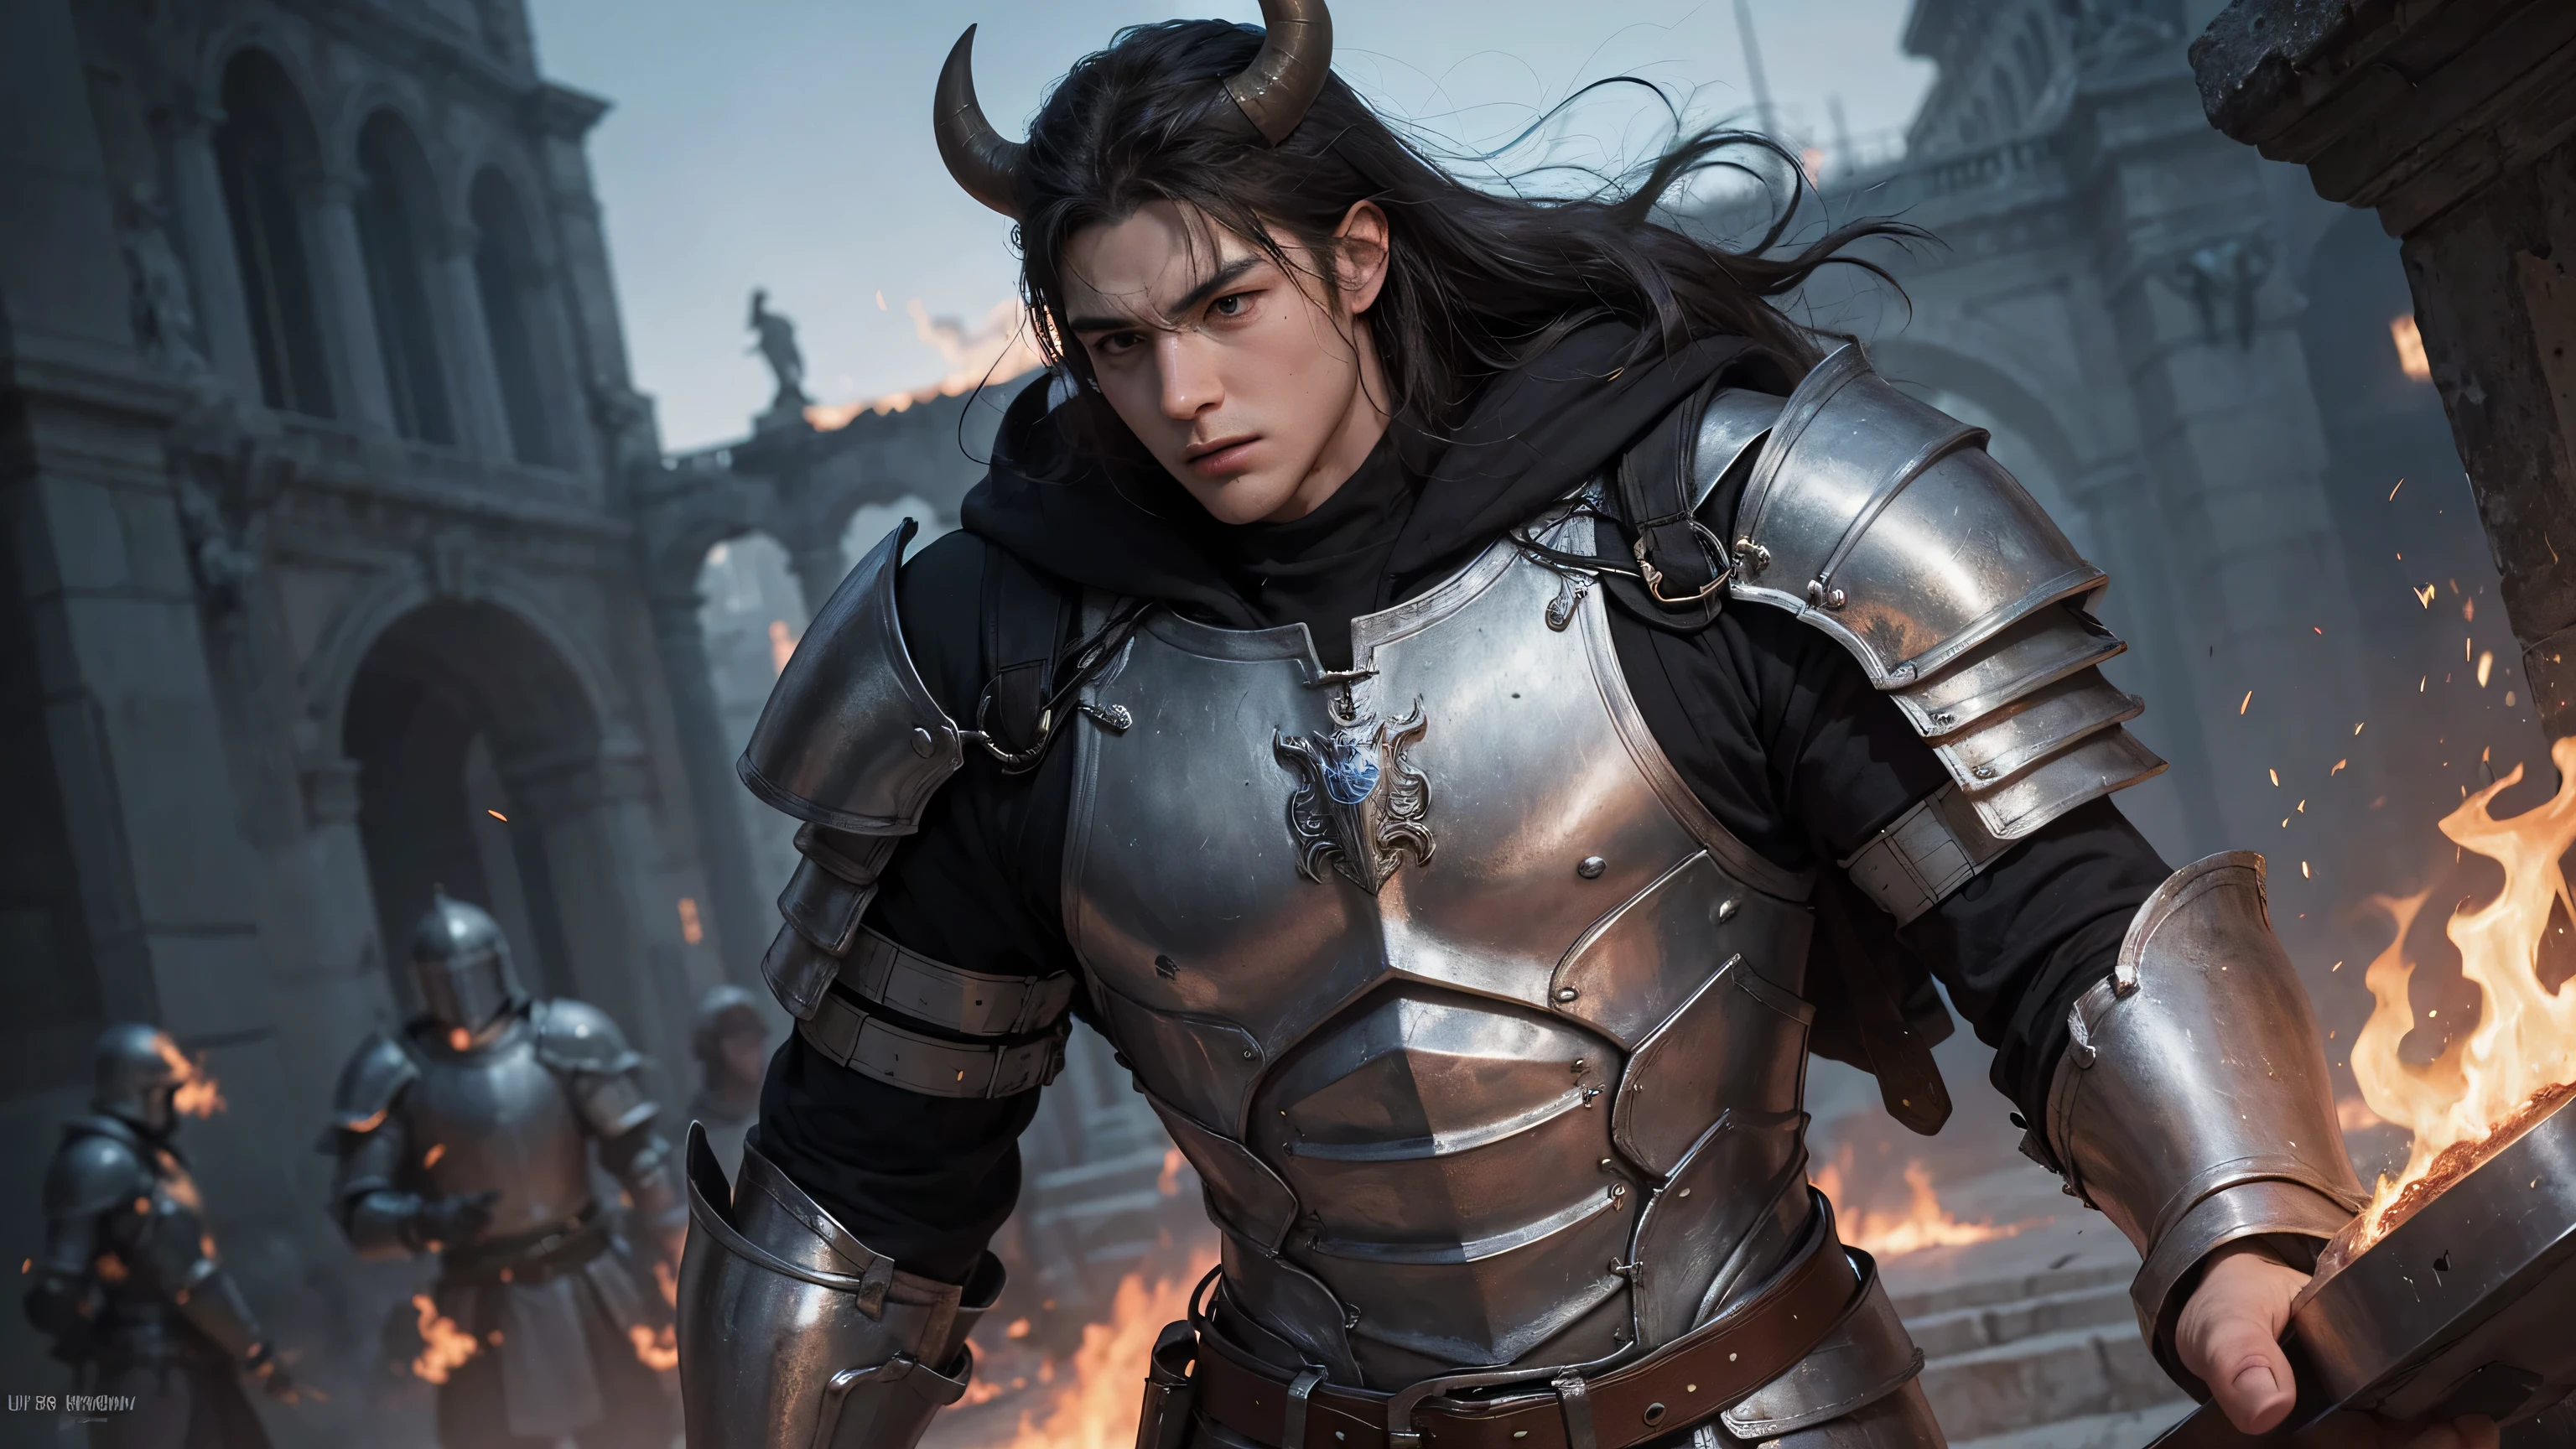 Rome Soldier young boy, Romance,High Detailed Face,Hair,(grey Iron body suit, Armour, Strong,),He handle knight with fire,Power, Ultimate,Ultra Detailed,Arcana Bull Background, Cenimatic Lighting,Day Time,